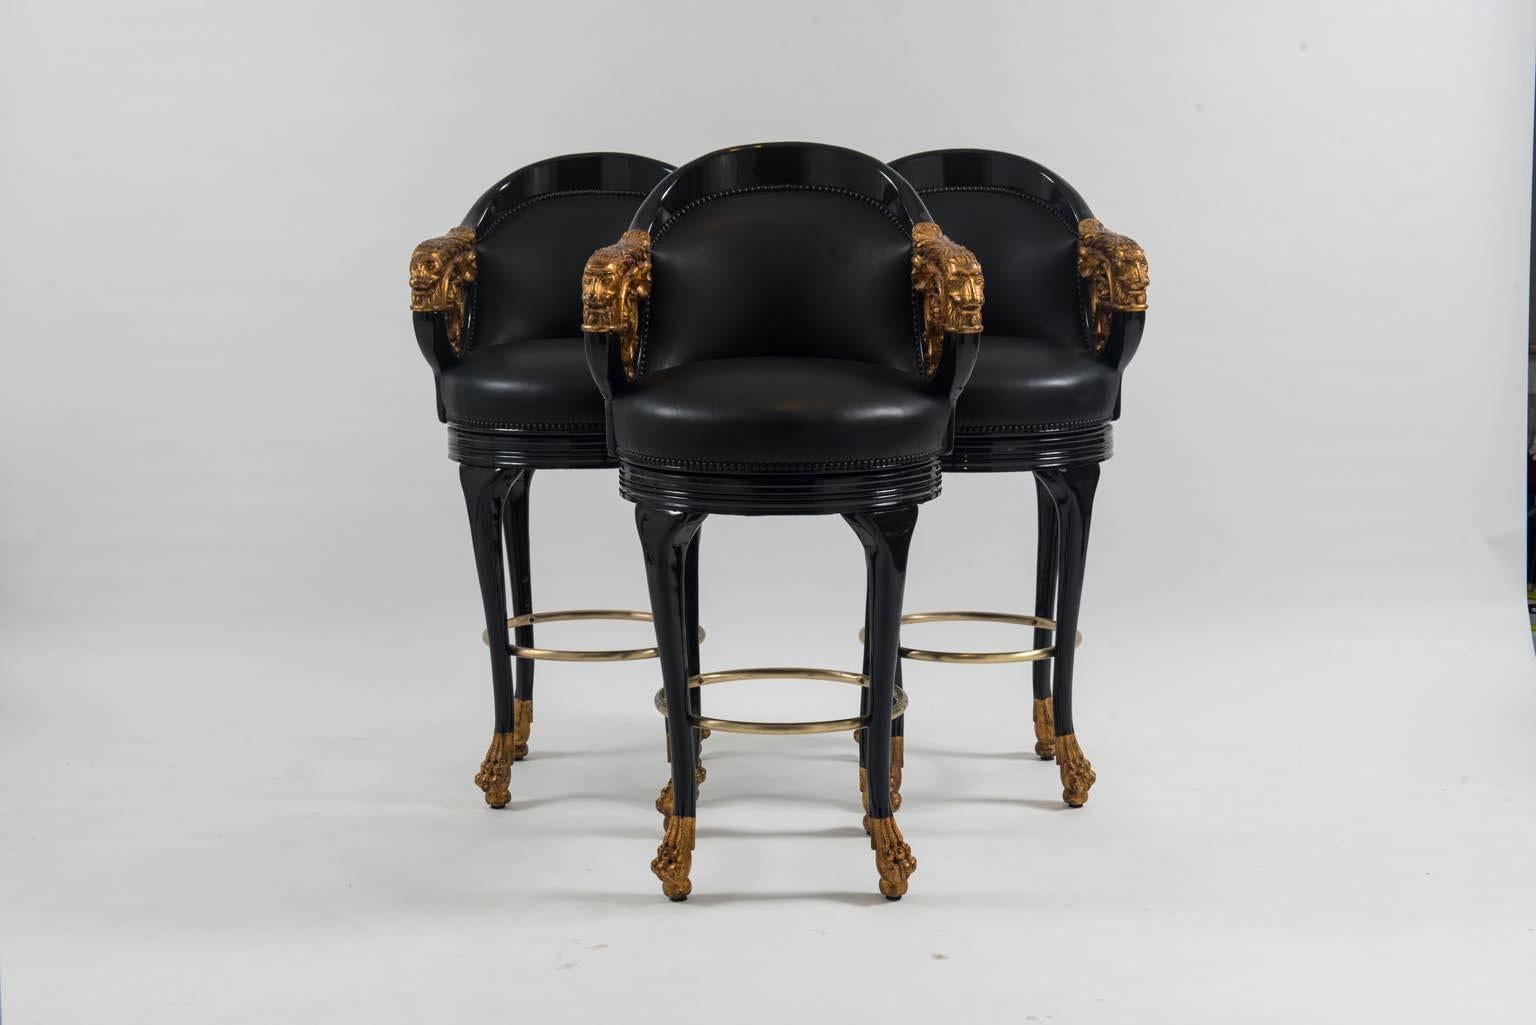 A set of three newly black lacquered and gilt wood Empire style leather barstools. Each of these newly upholstered barstools feature French nailhead detailing, a brass footrest, and swivel.